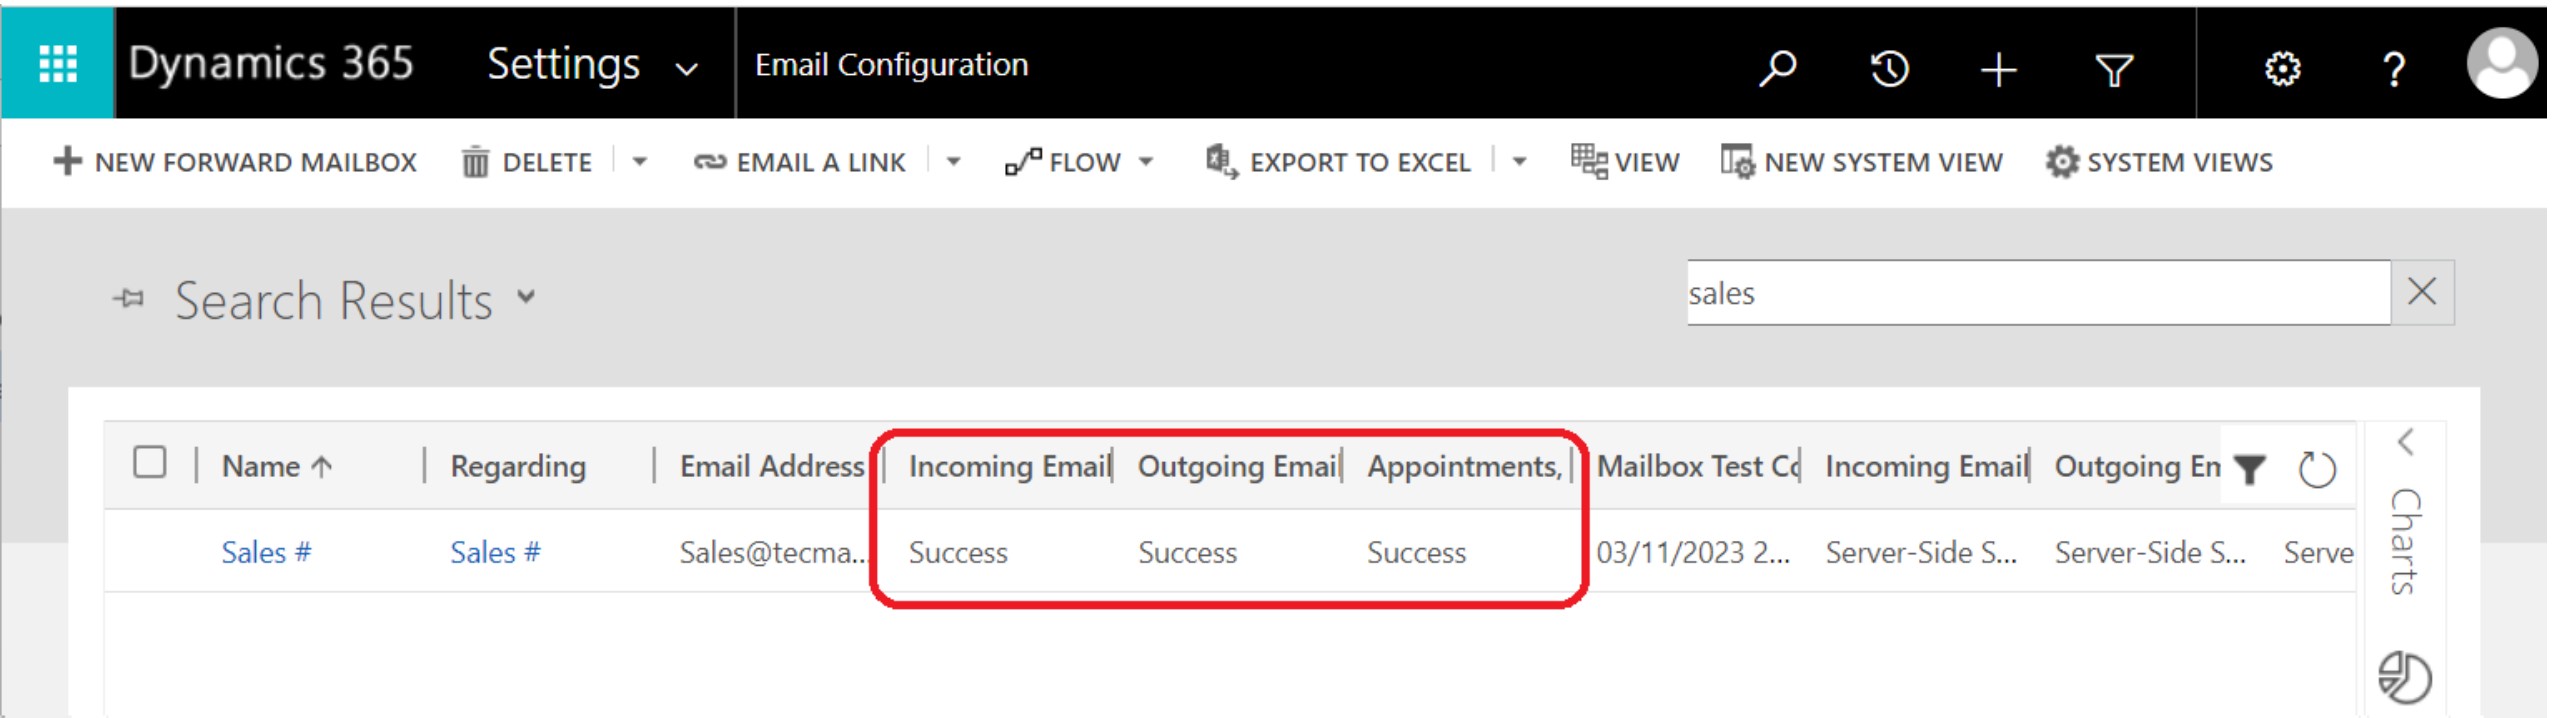 Screenshot showing the successful testing and enabling of the mailbox in Dynamics 365 CRM.